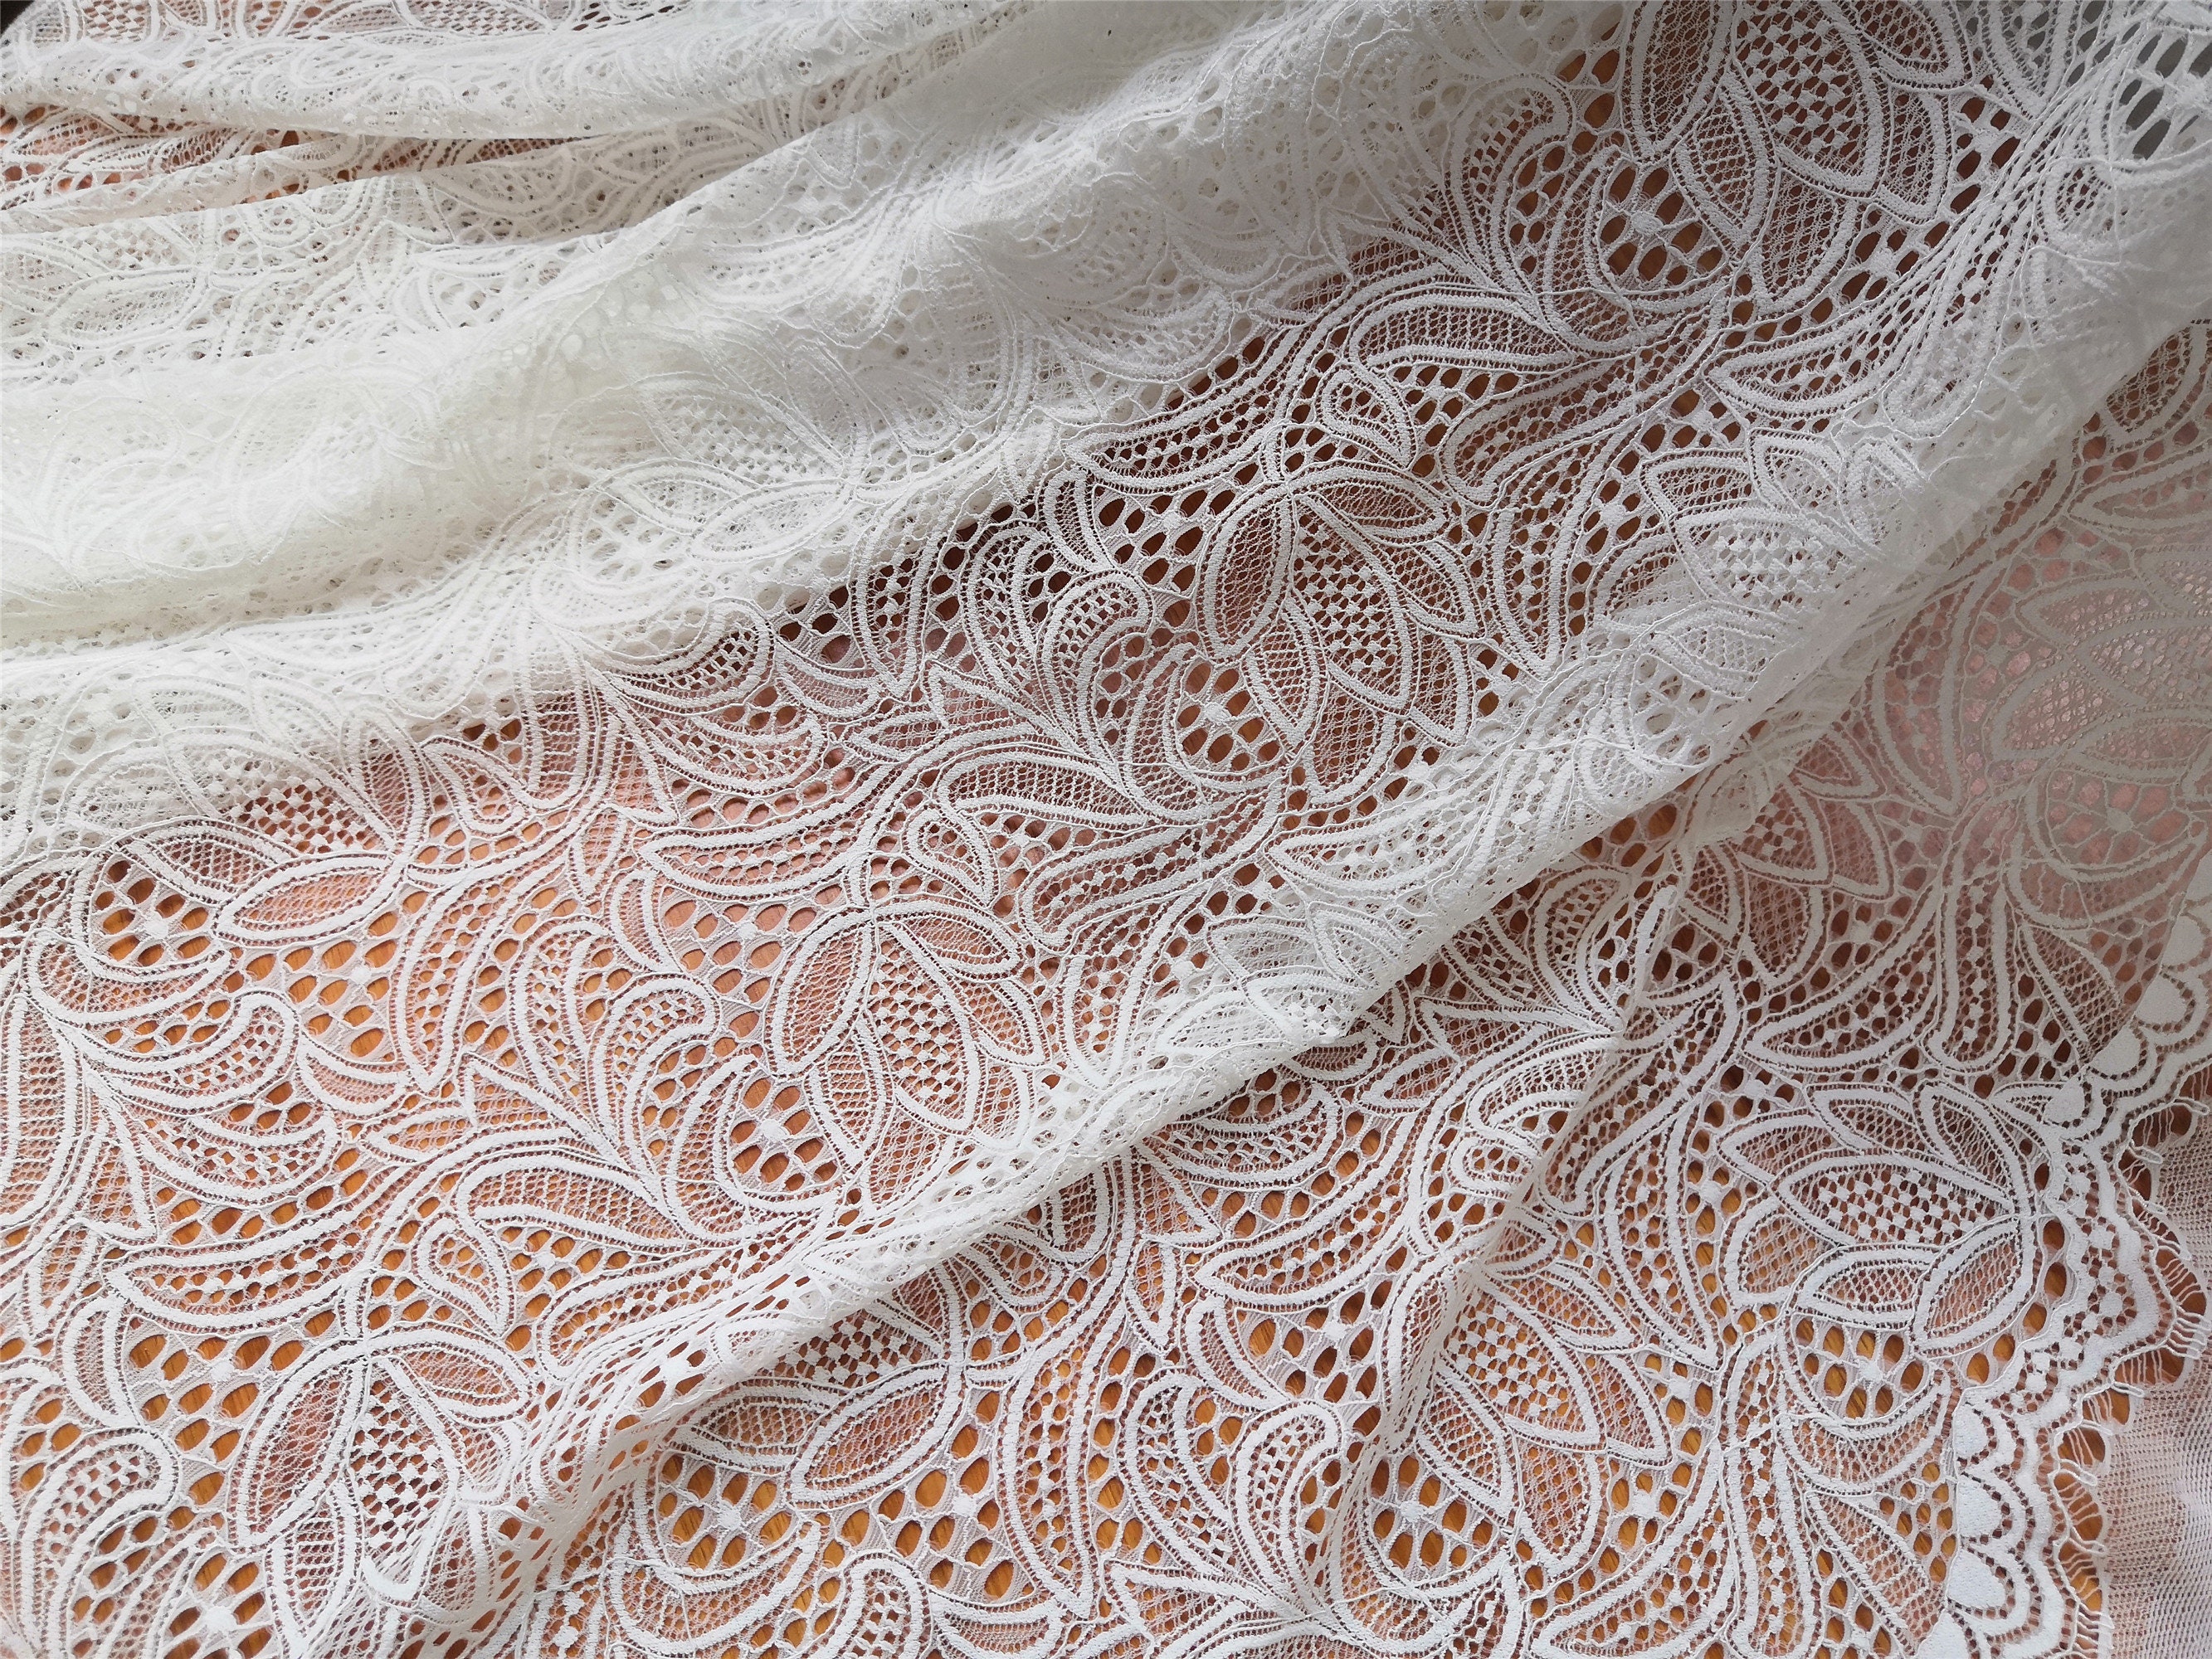 Stretch Lace Fabric / off White Stretch Lace / Floral Lace Fabric